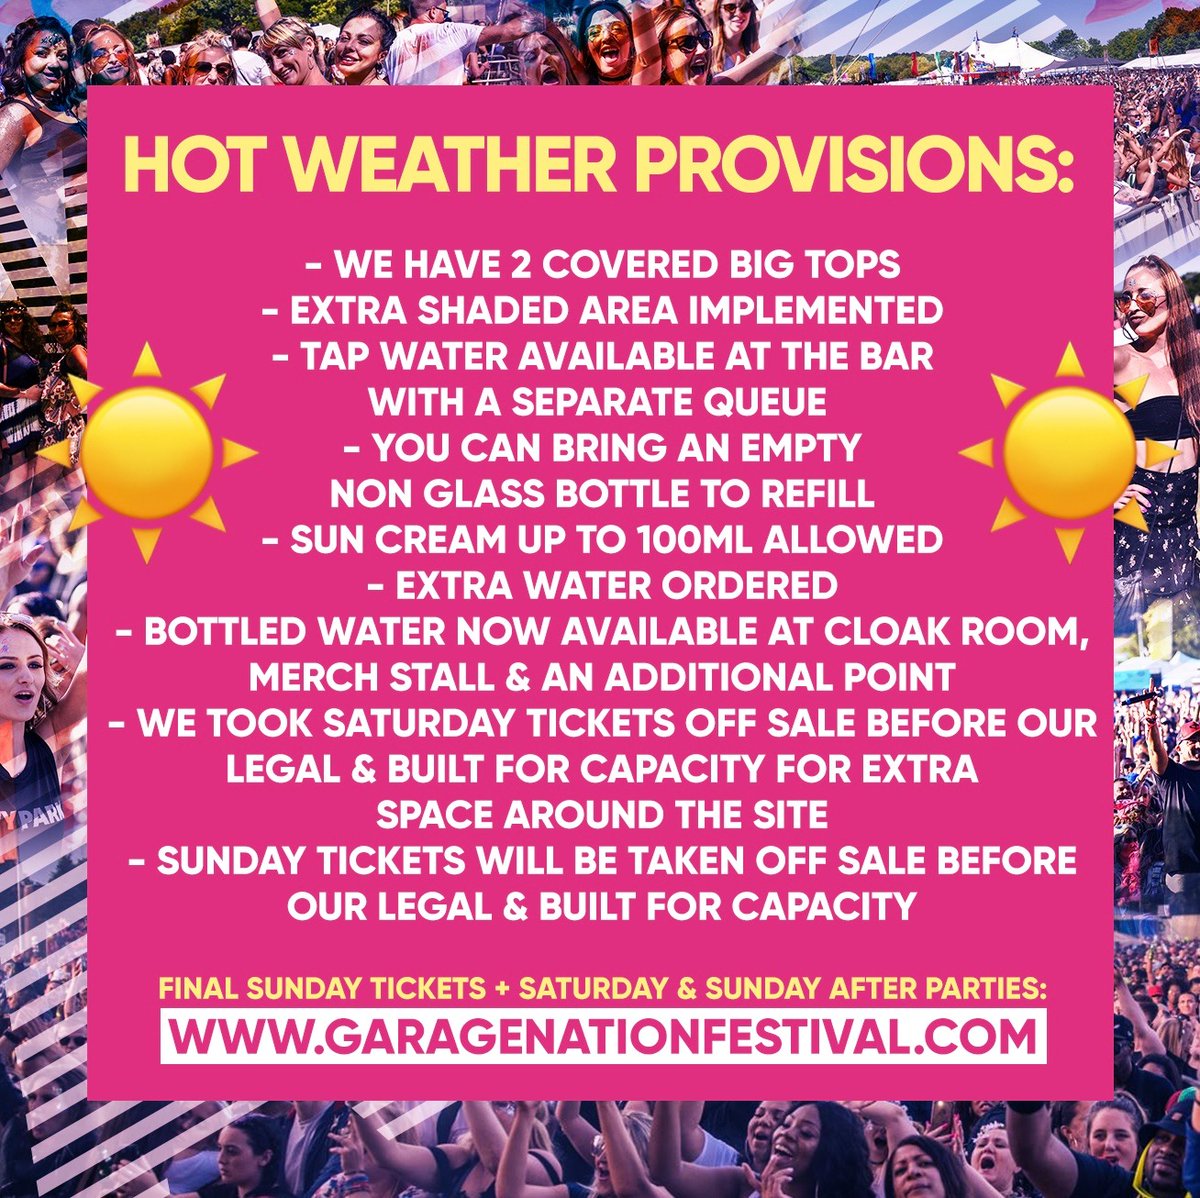 We have beautiful hot weather this weekend but remember to wear sun protection, stay hydrated & be sensible! Saturday After Party @ Palm Beach in Croydon Tickets & Final Sunday Tickets at garagenationfestival.com